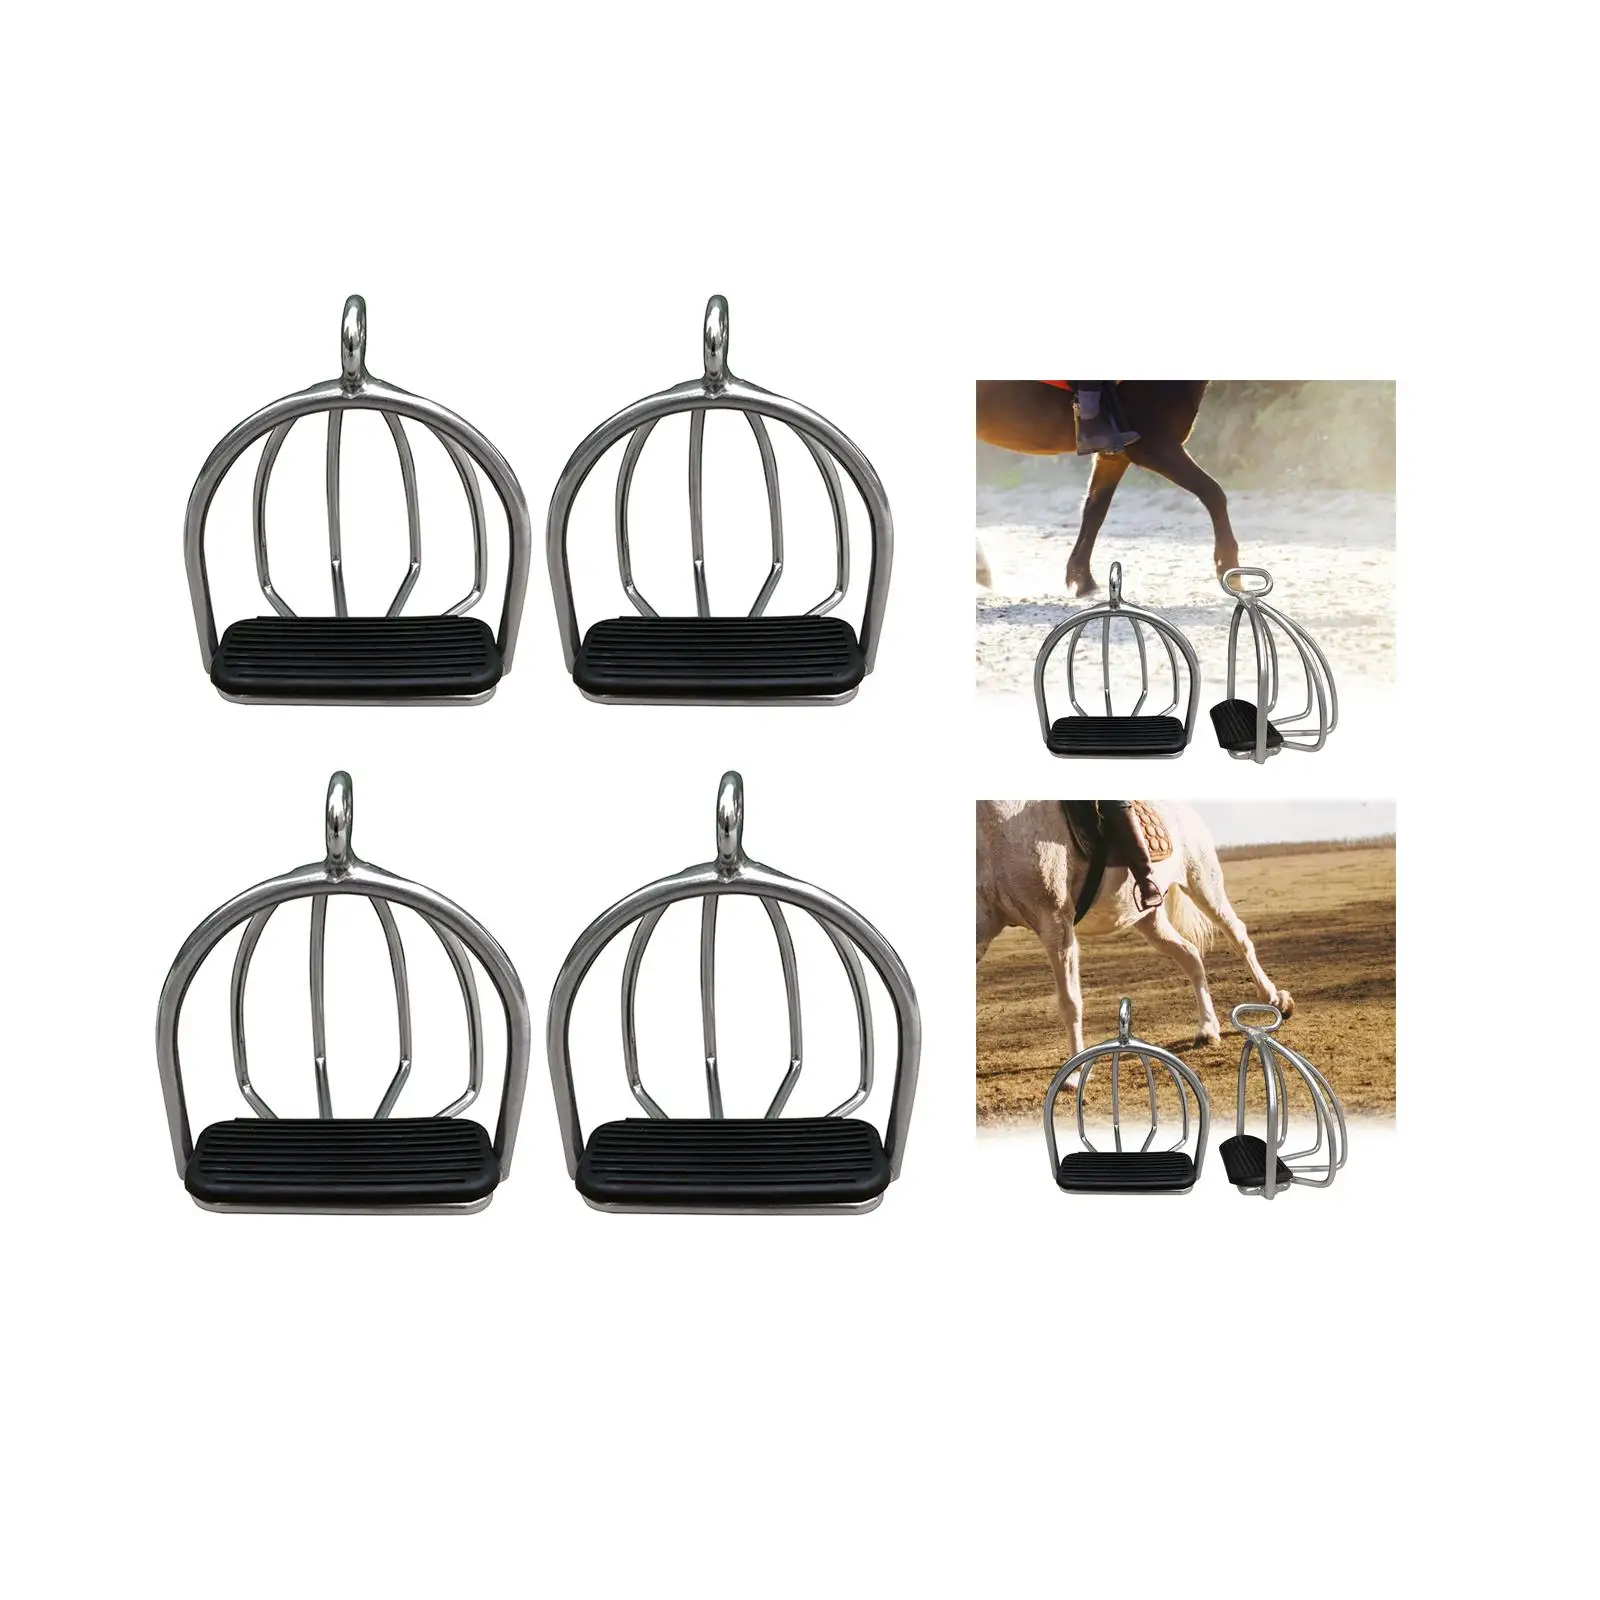 2x Cage Horse Riding Stirrups Rubber Pad Stainless Steel Tool Equestrian Sports for Safety Horse Riding Outdoor Accessories Kids